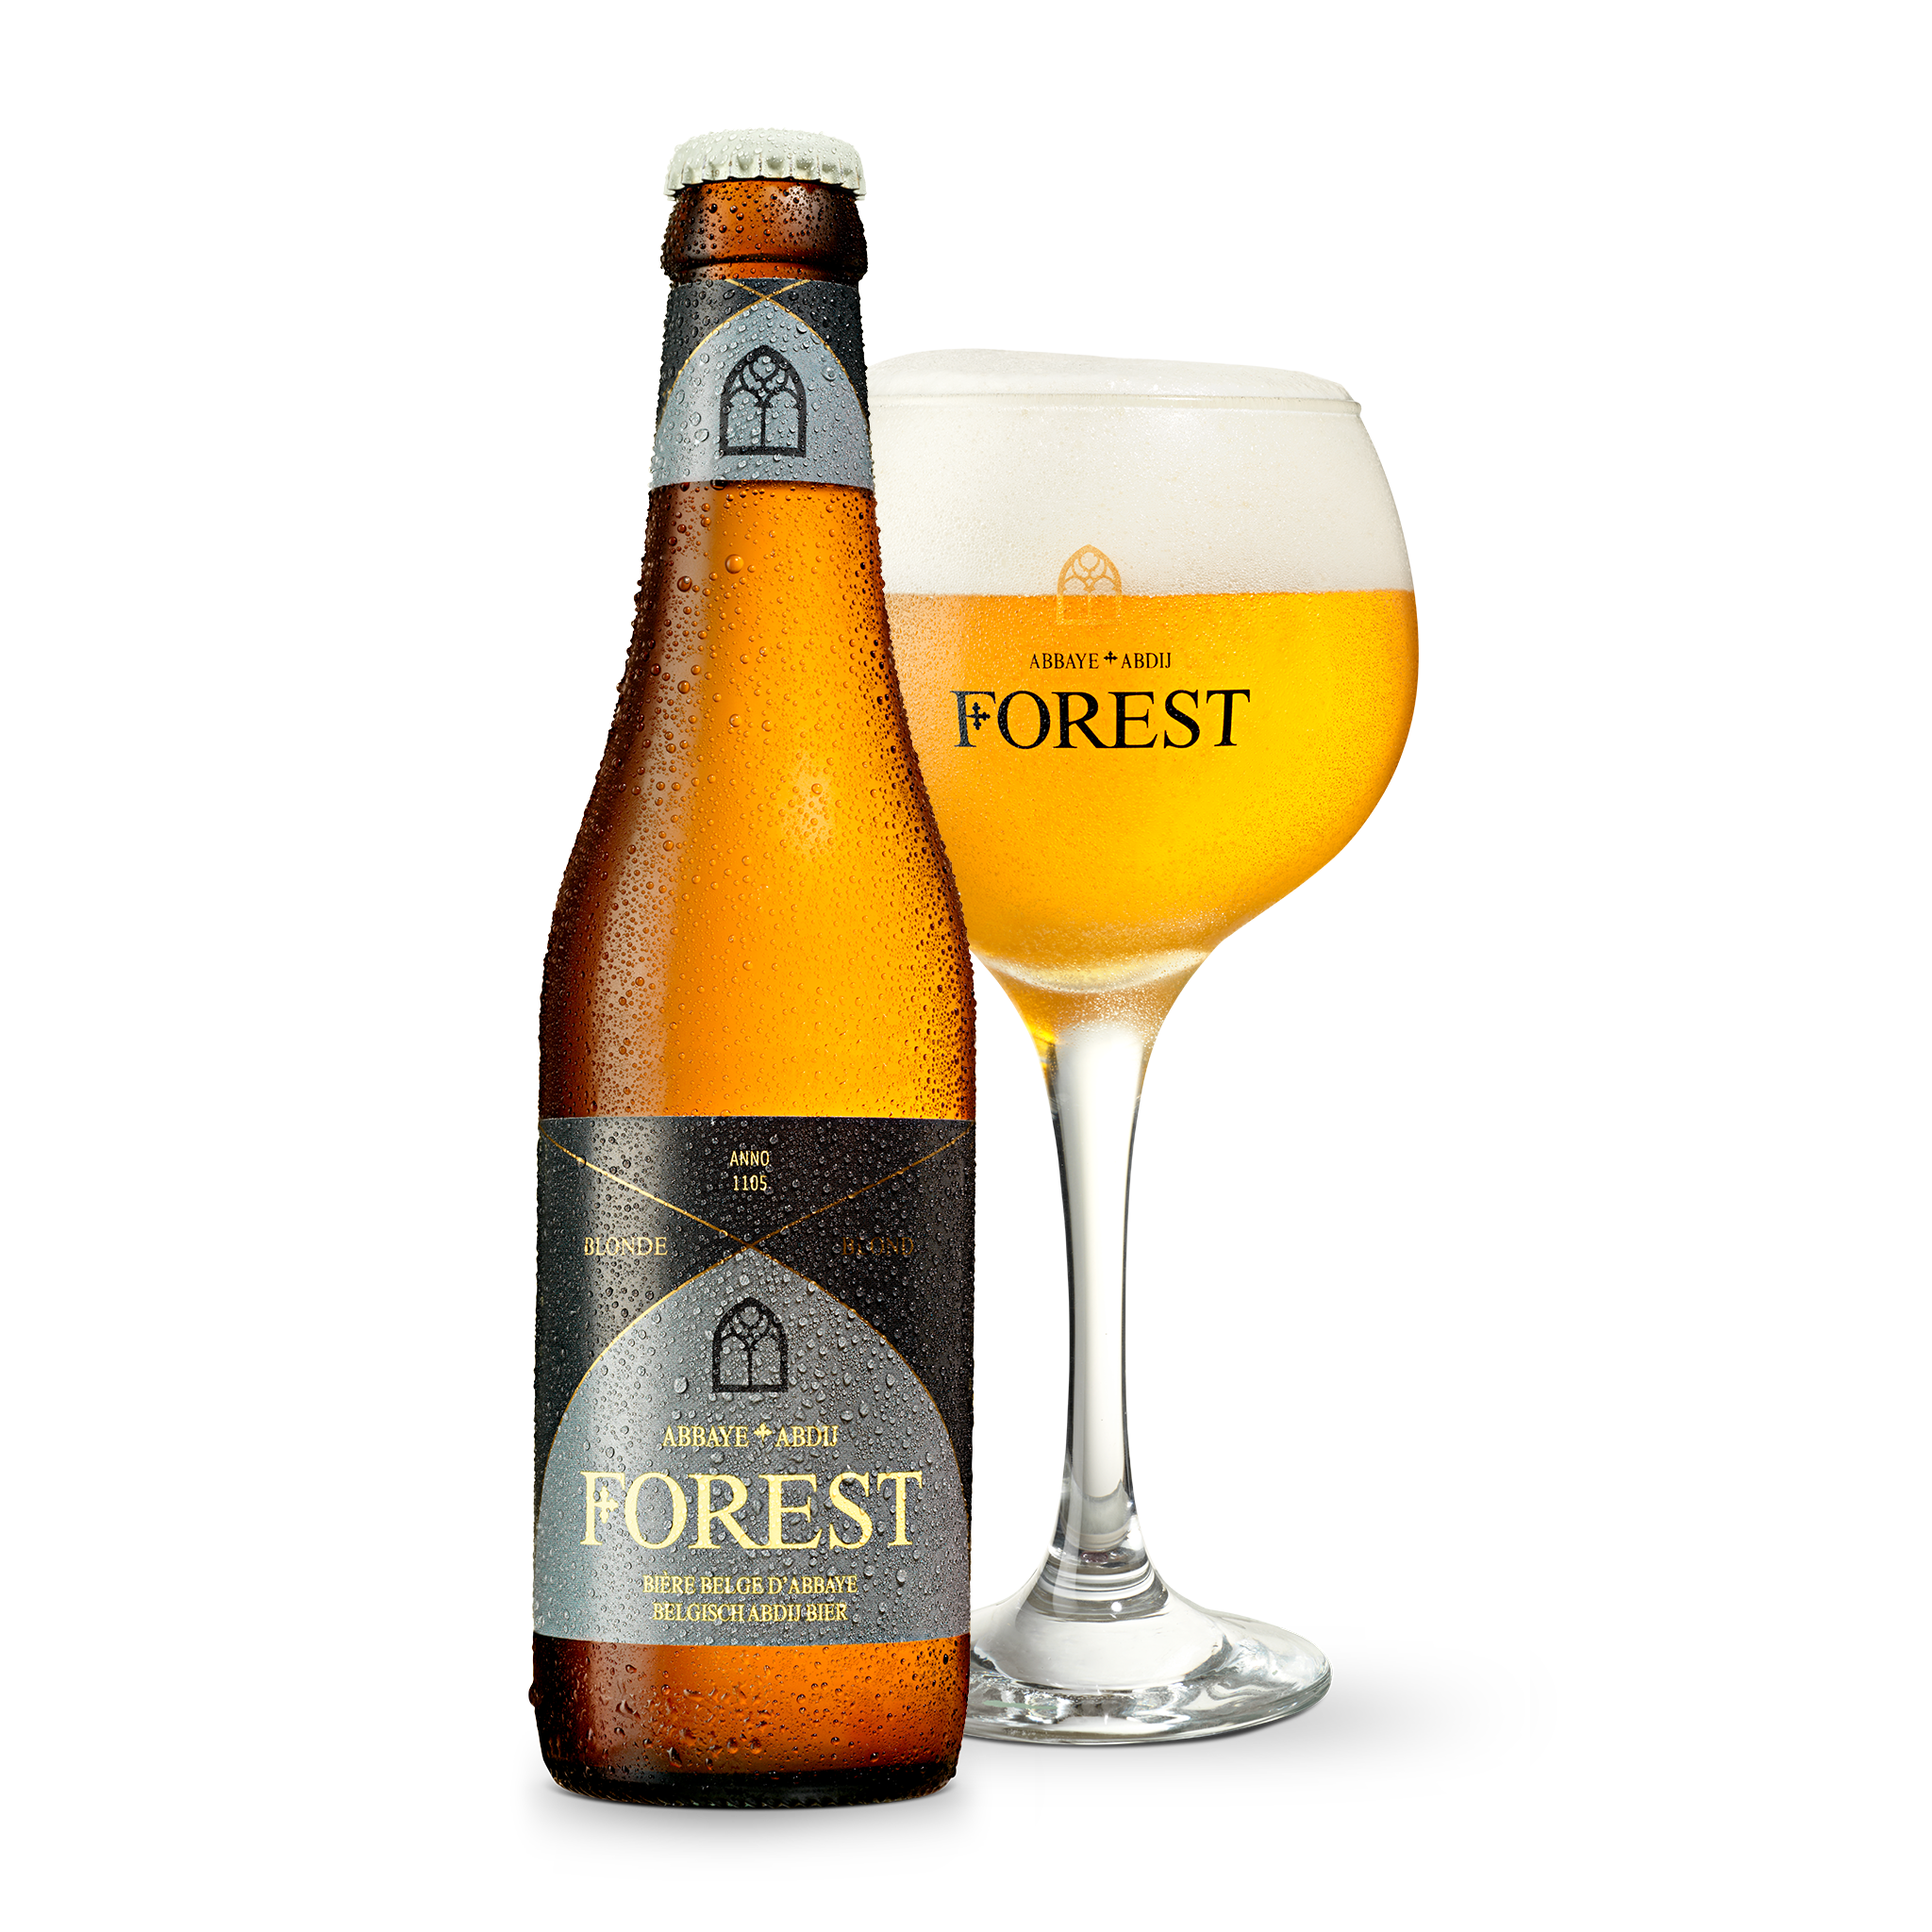 https://silly-beer.com/wp-content/uploads/2020/06/abbaye-forest.png